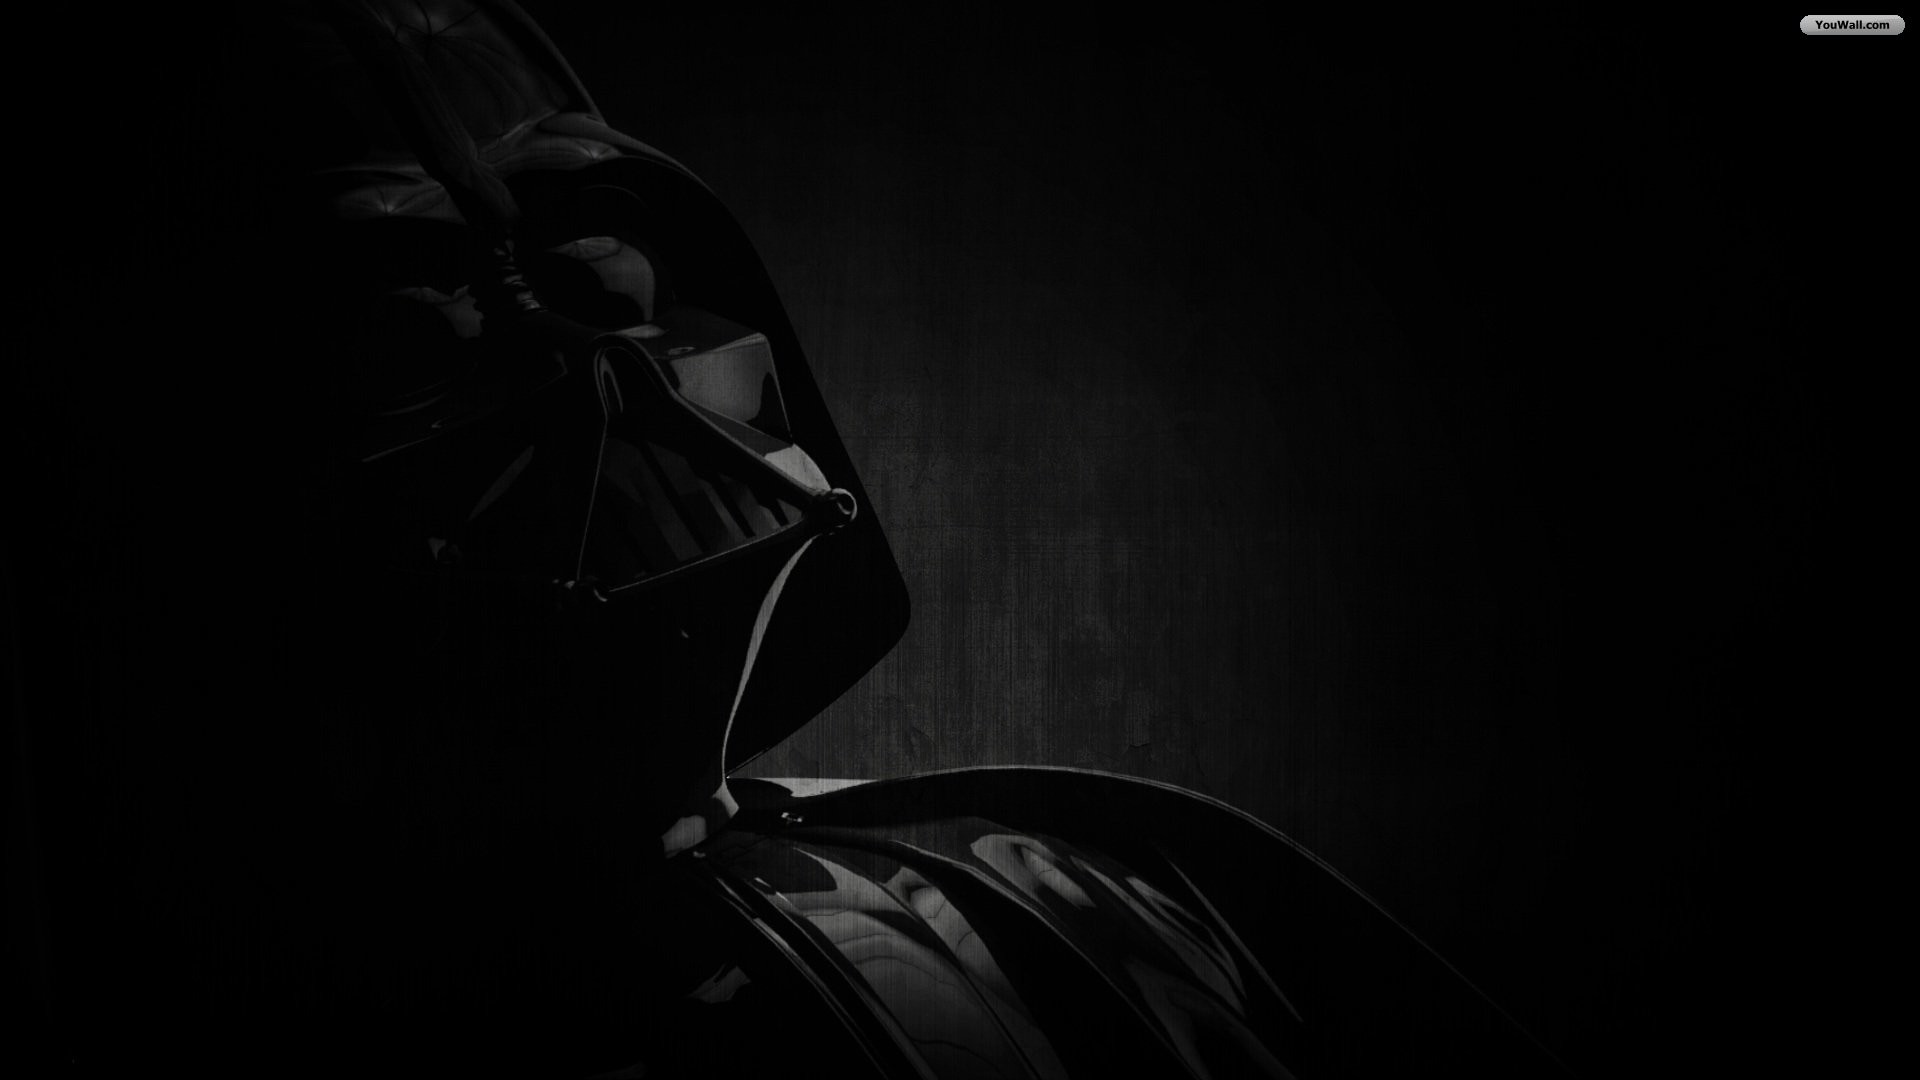 1920x1080 Darth Vader Wallpaper Collection For Free Download